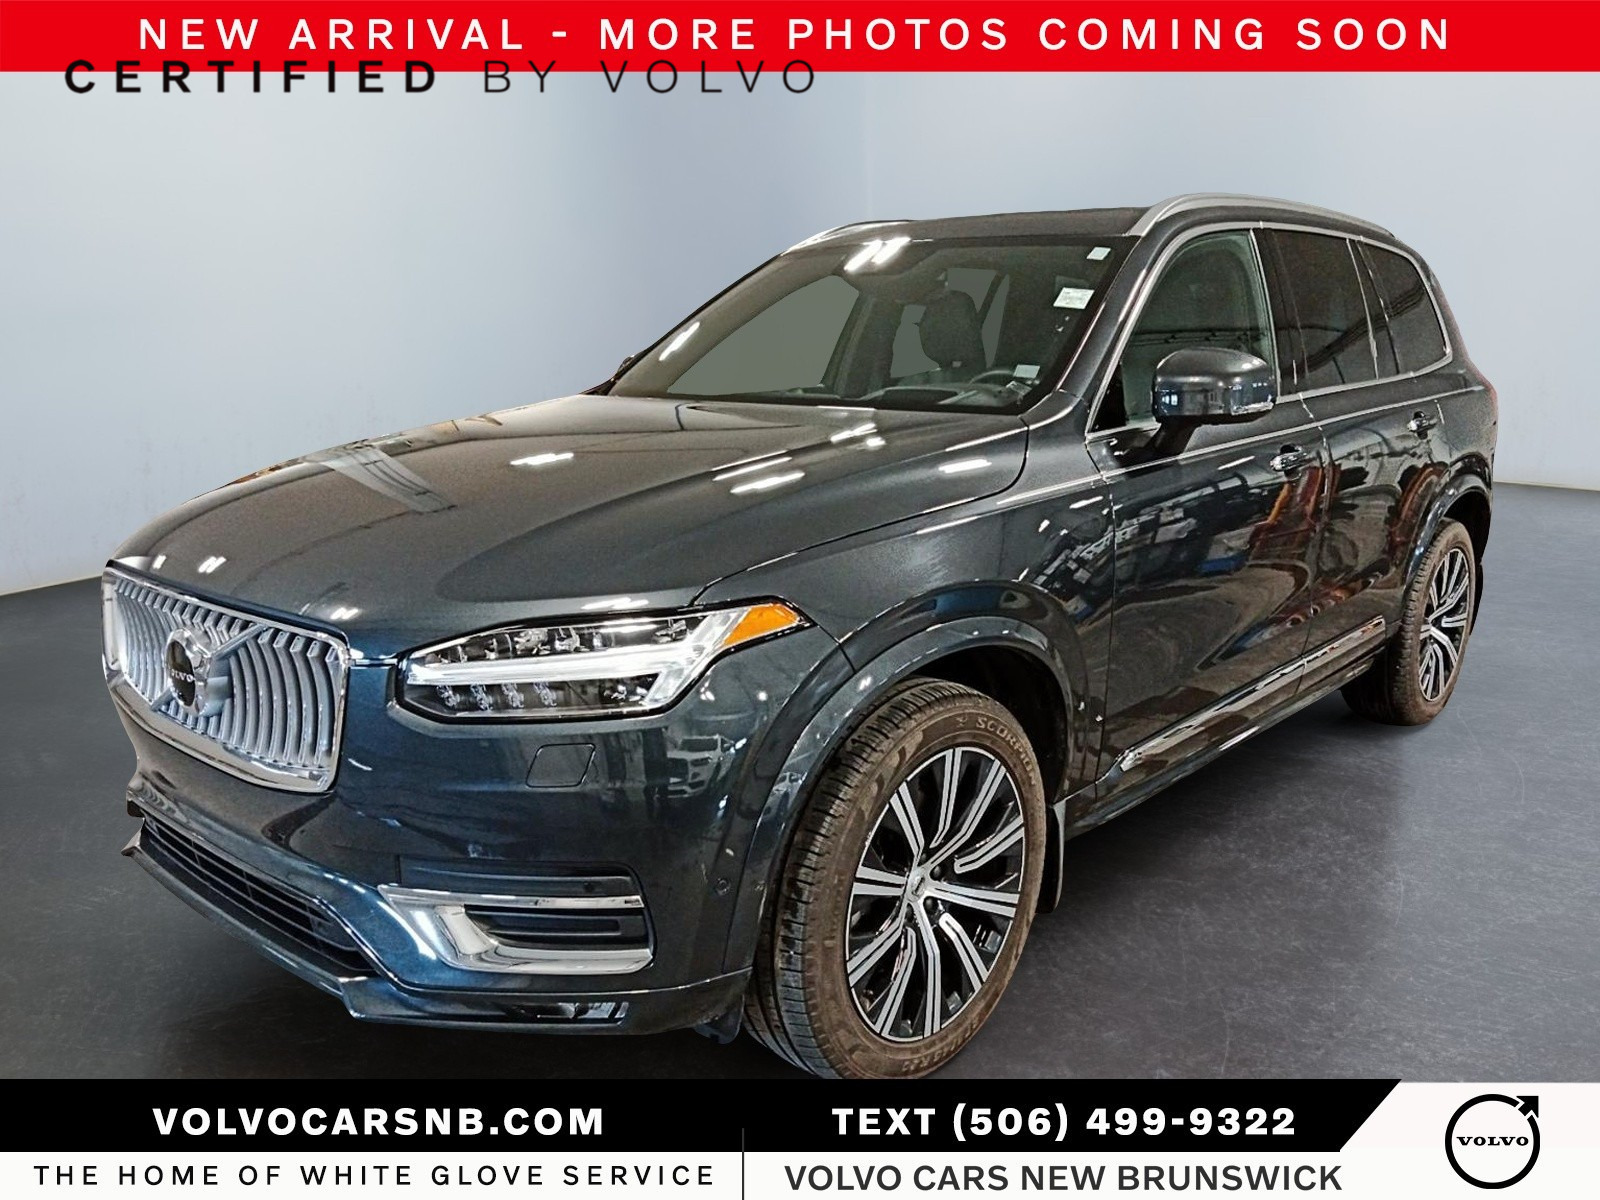 2022 Volvo XC90 Certified Pre Owned! | Apple CarPlay | Sun Roof | 